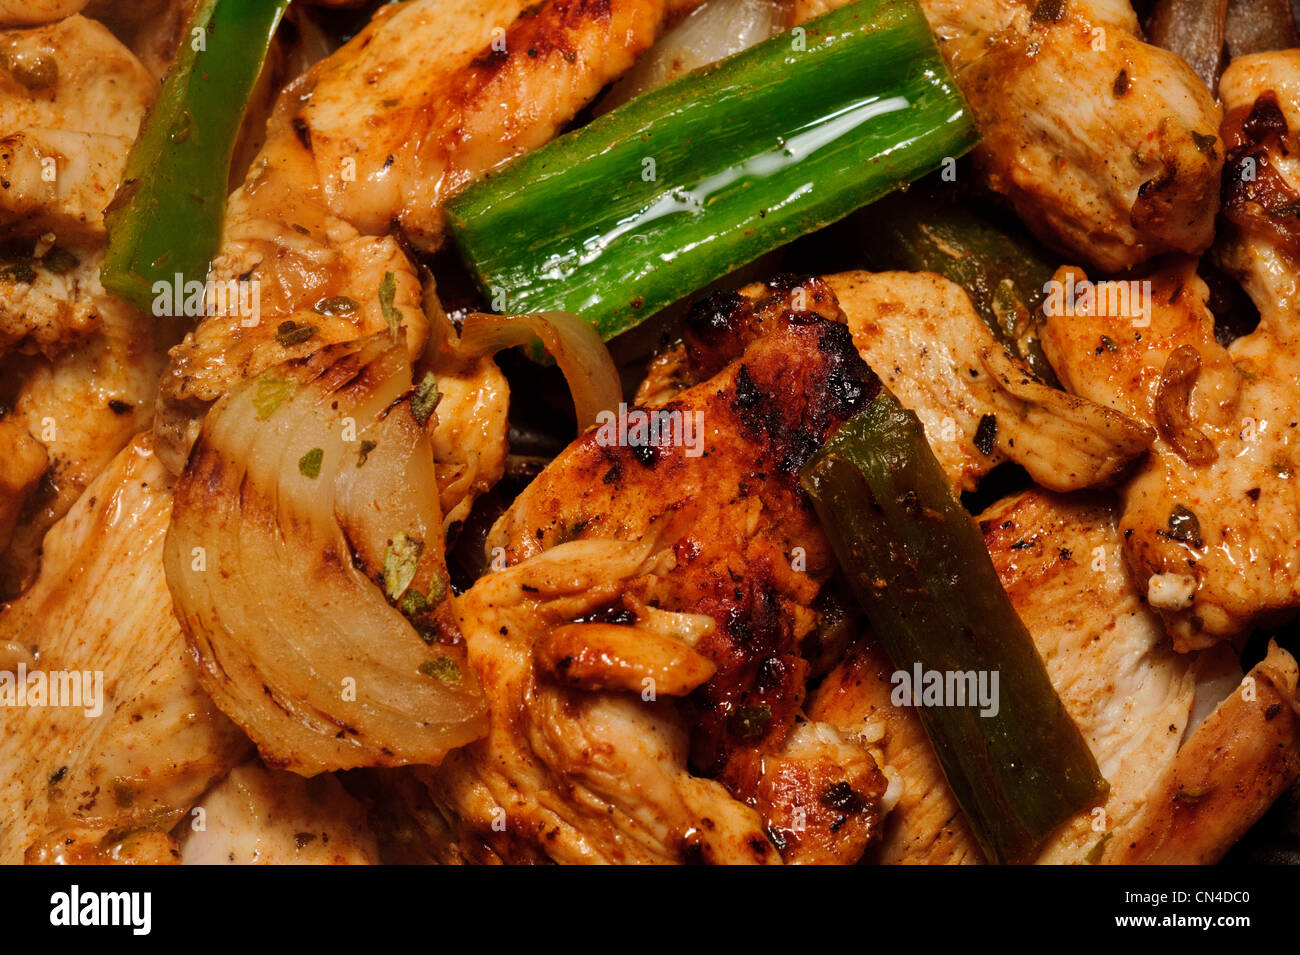 Chicken and vegetable dish Stock Photo